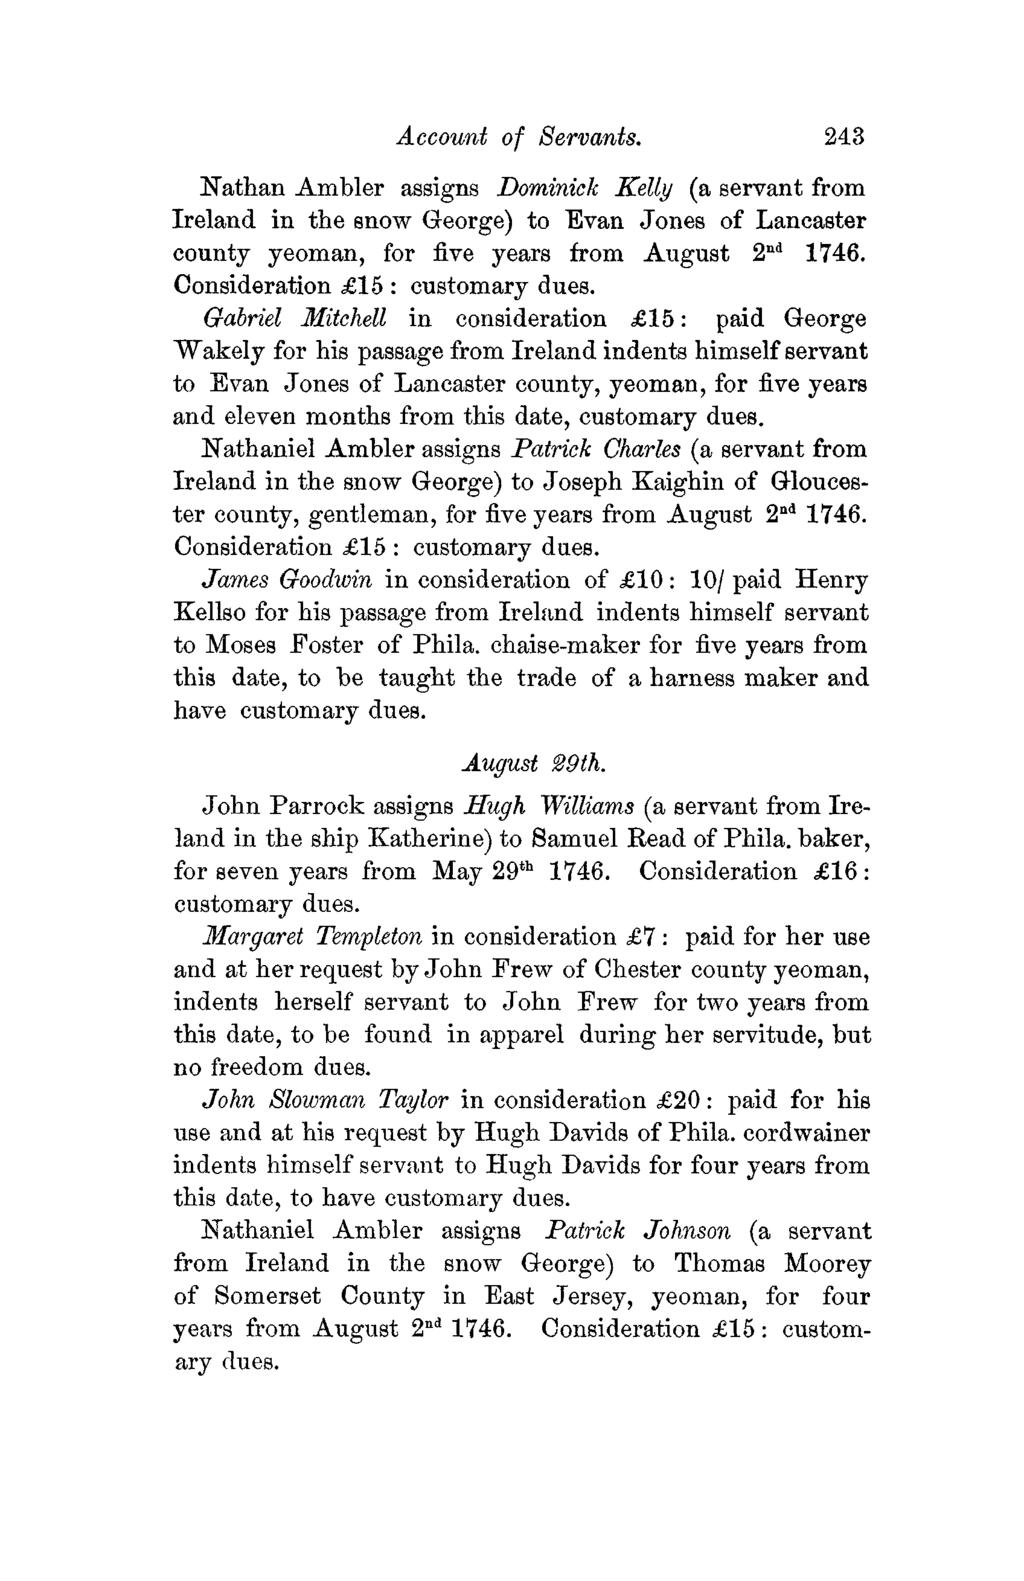 Account of Servants. 243 Nathan Ambler assigns Dominick Kelly (a servant from Ireland in the snow George) to Evan Jones of Lancaster county yeoman, for five years from August 2 nd 1746.